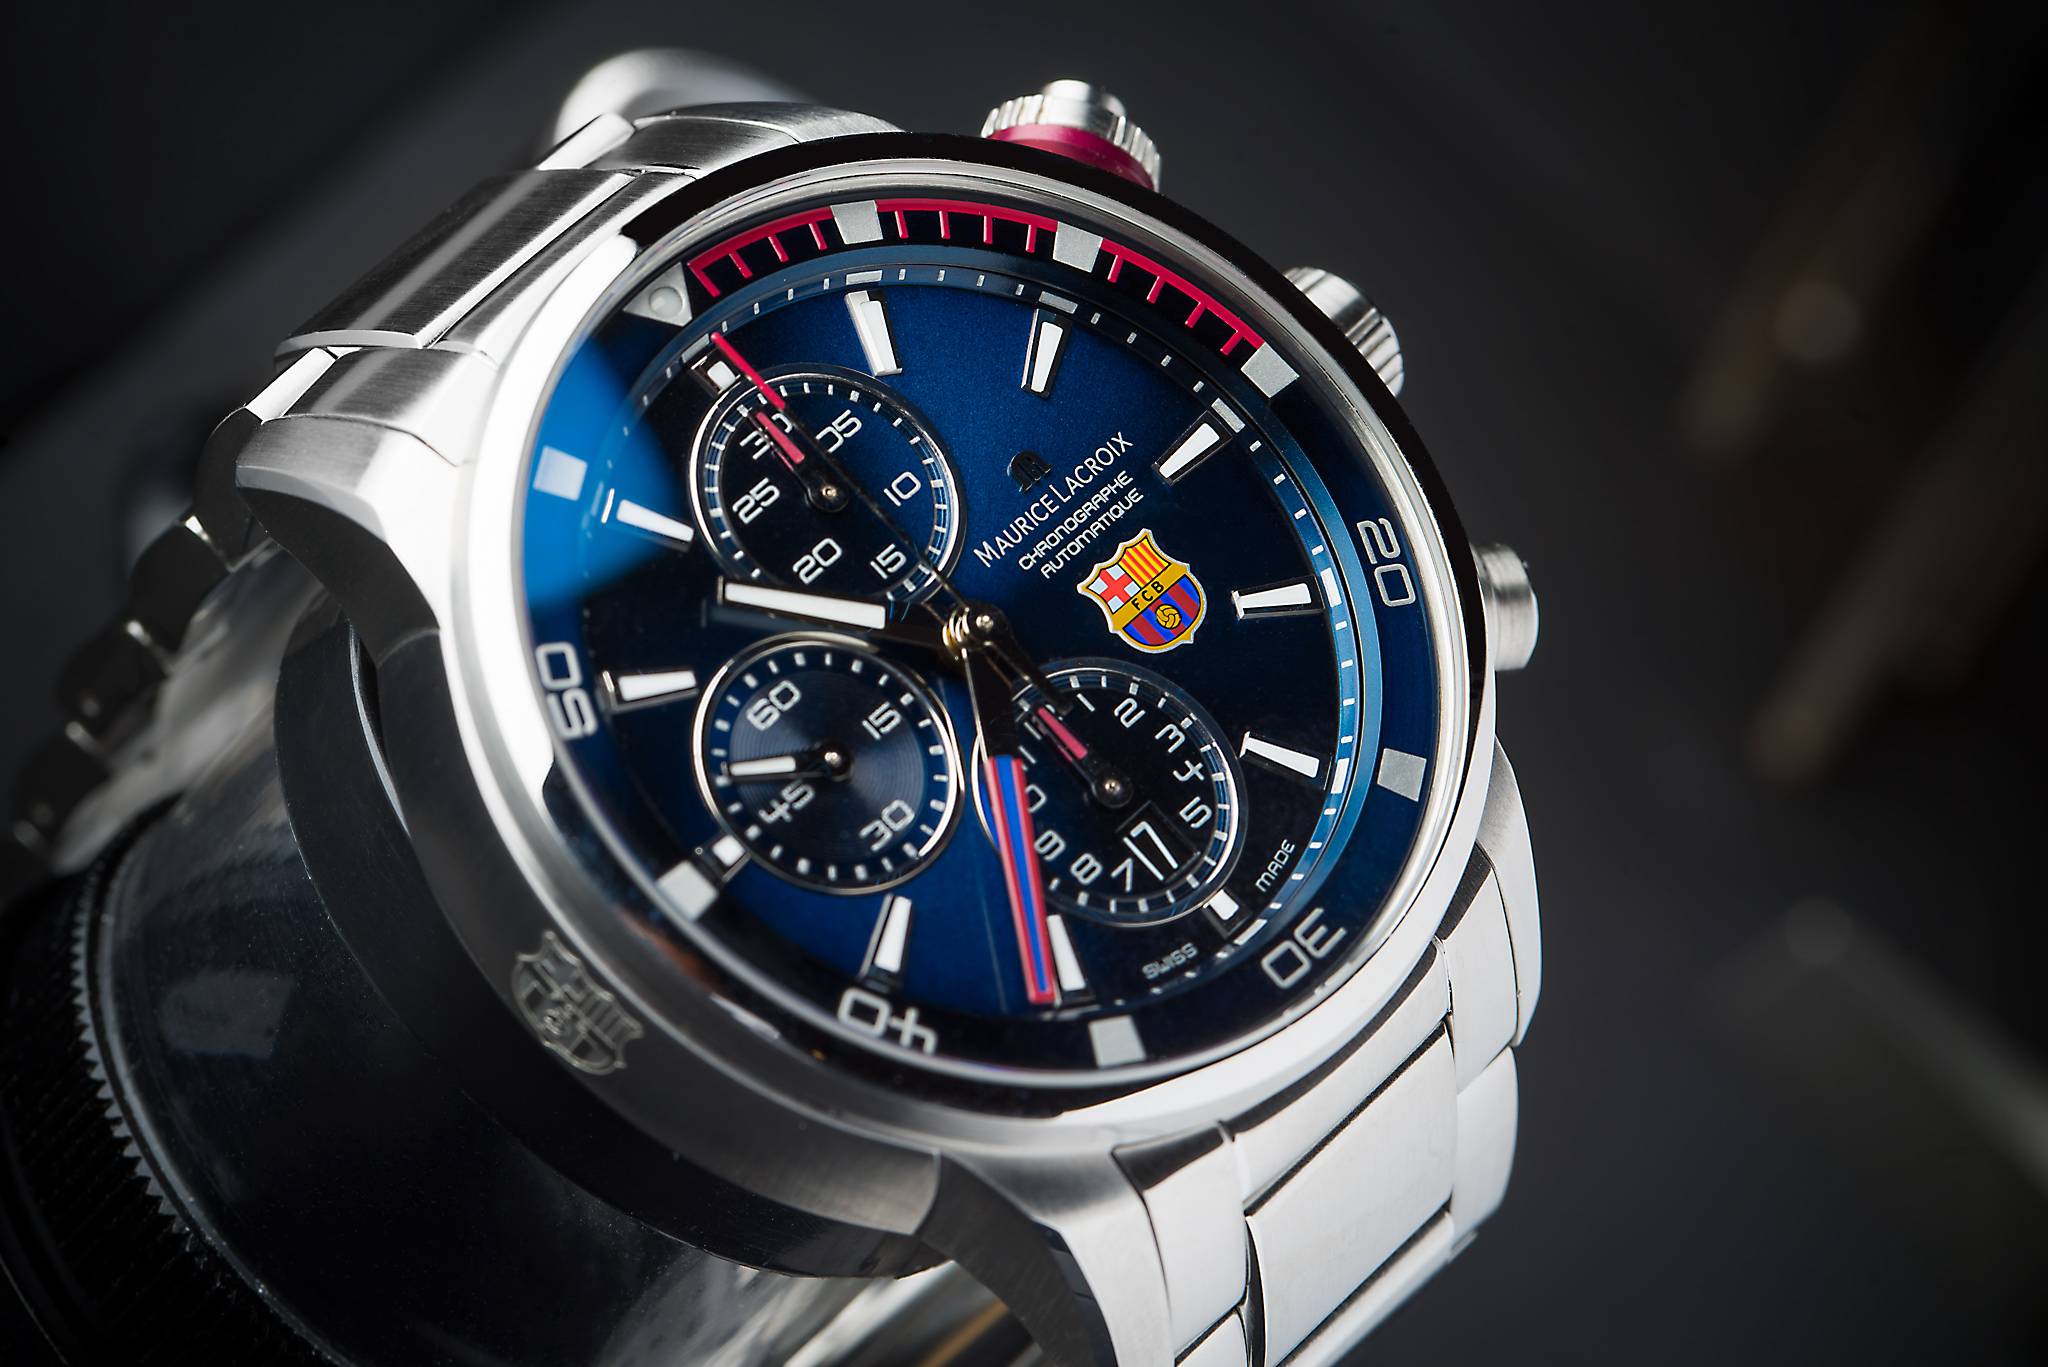 Hands On The Maurice Lacroix Pontos S FC Barcelona Official Watch 2